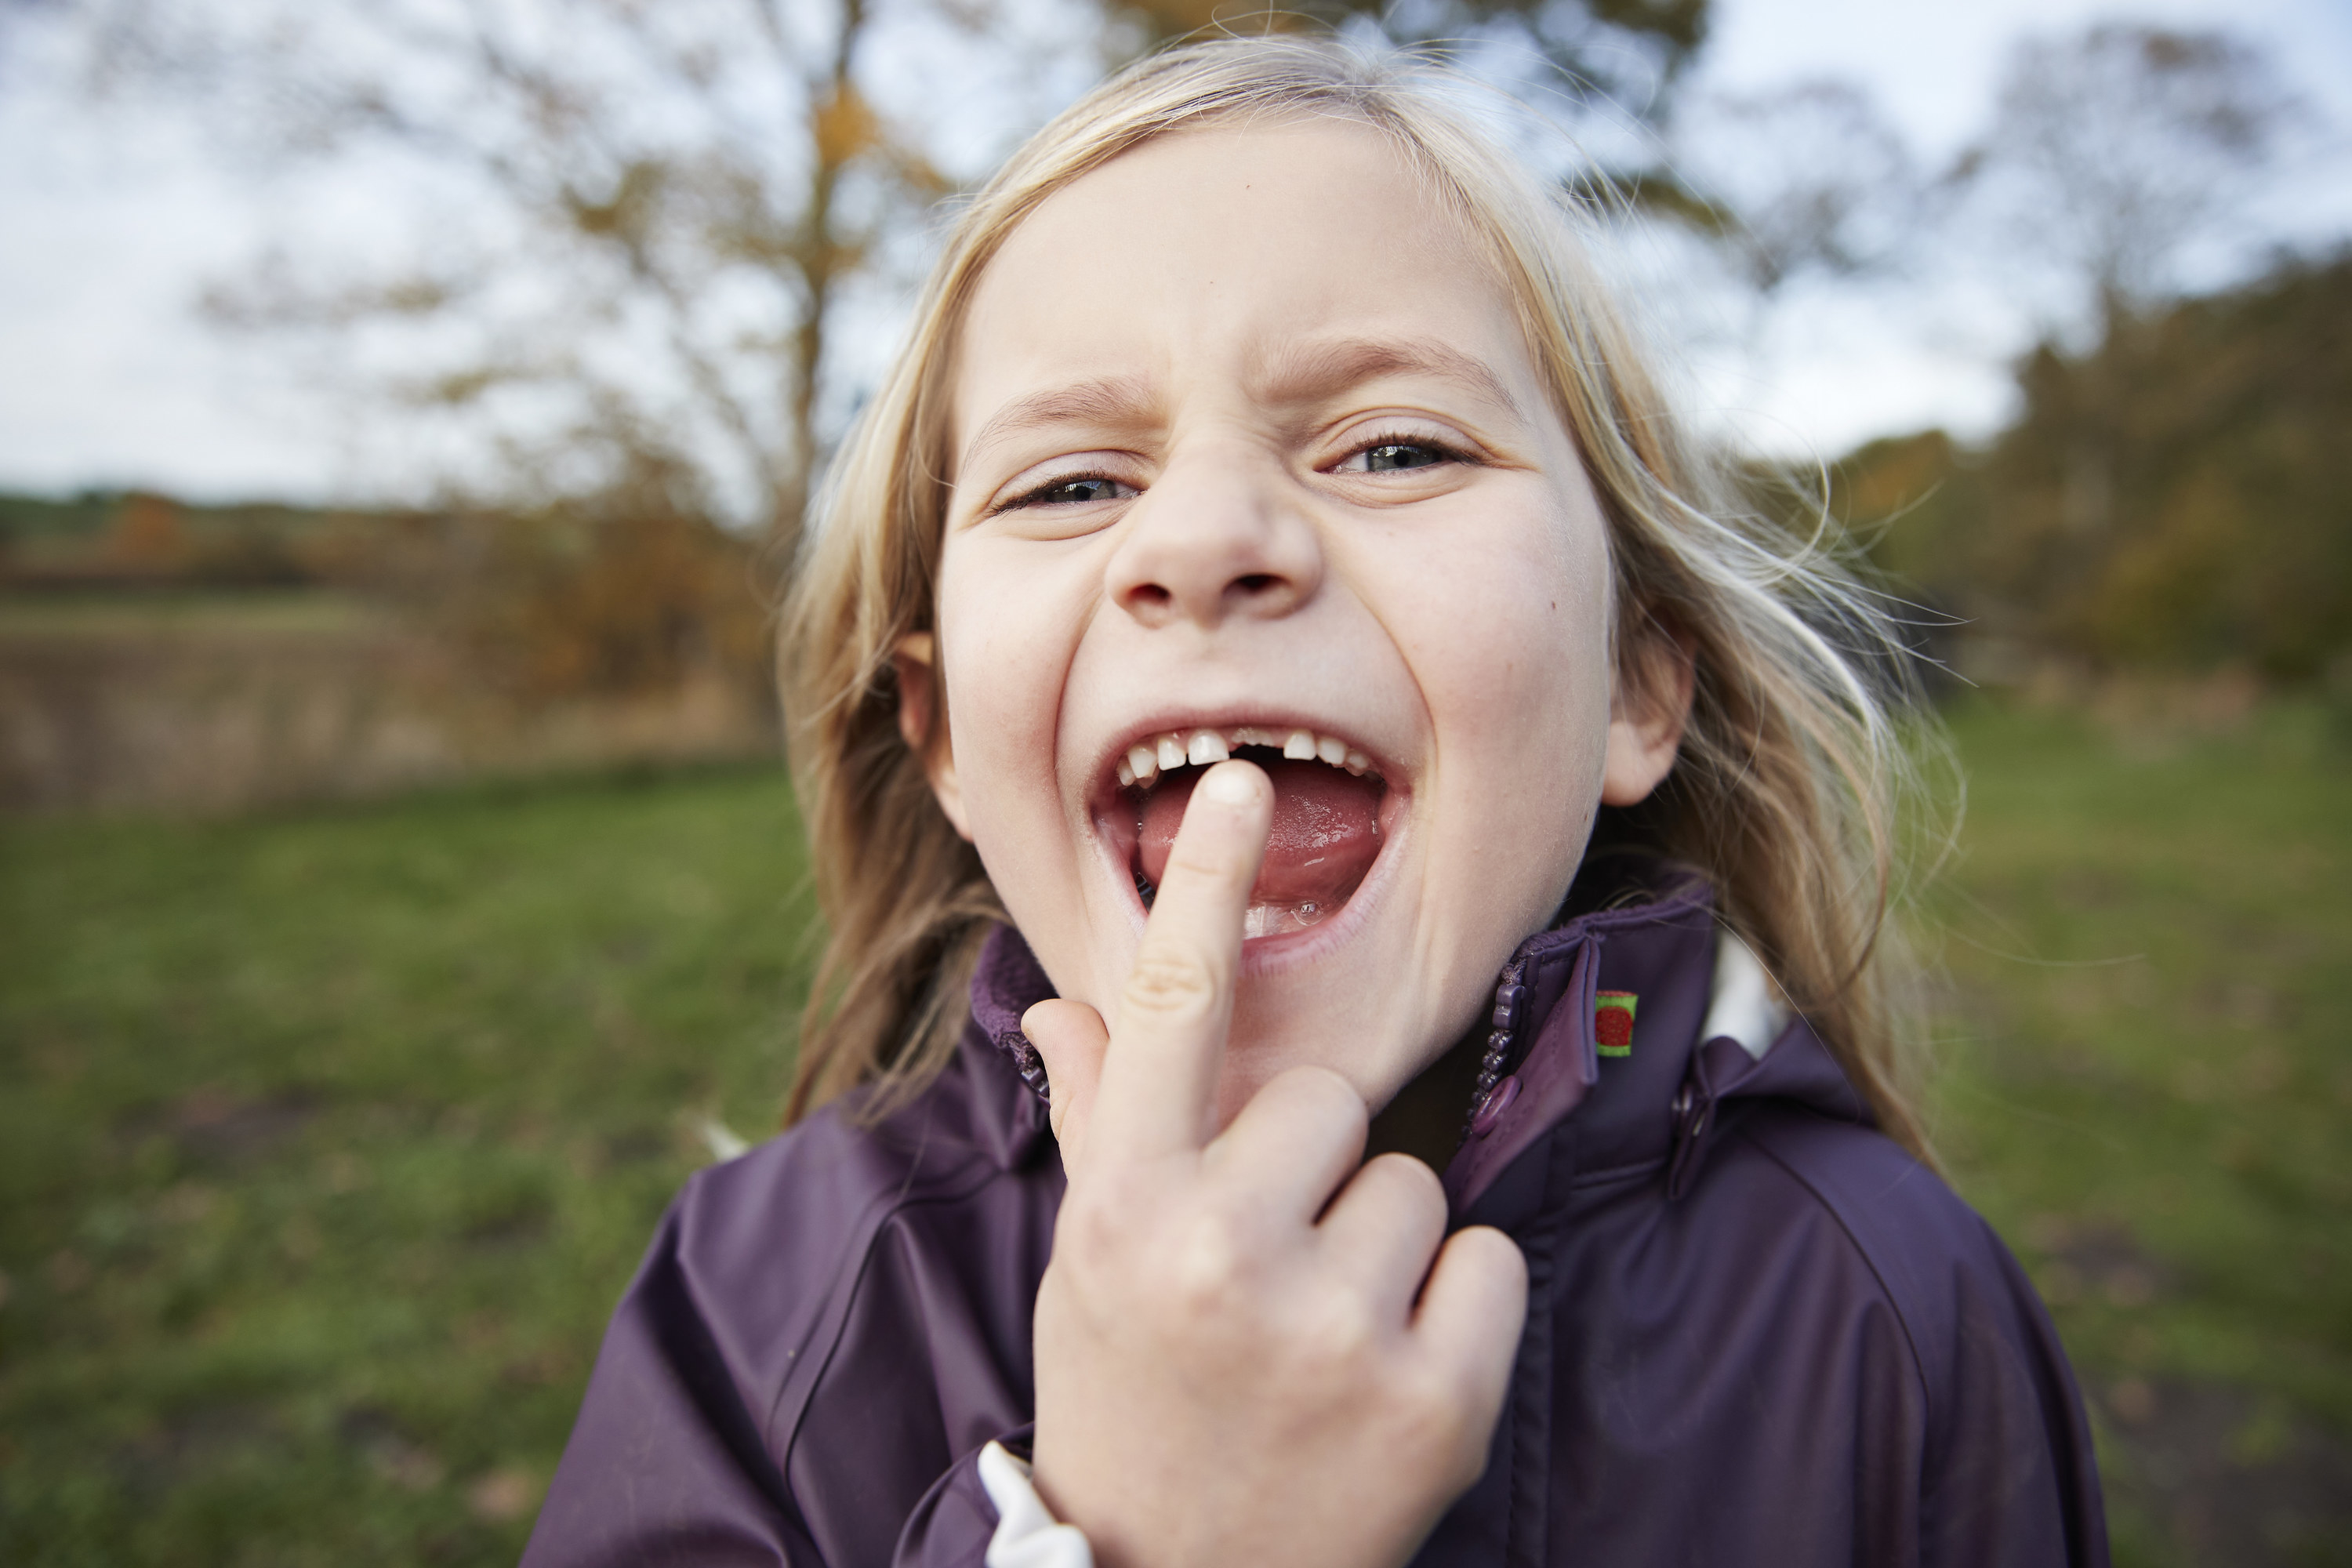 A kid showing their broken tooth